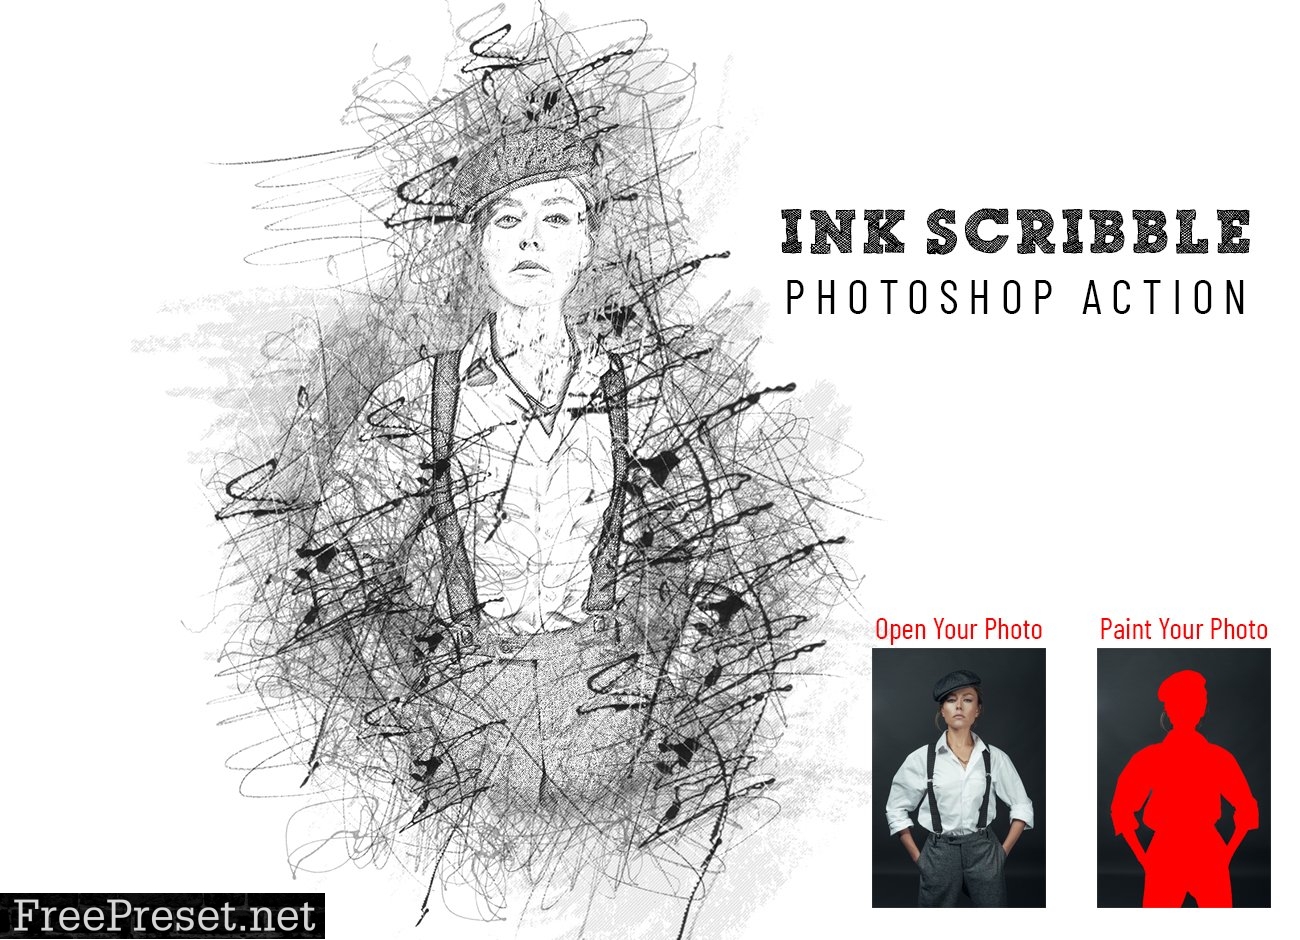 Ink Scribble Photoshop Action 6996611